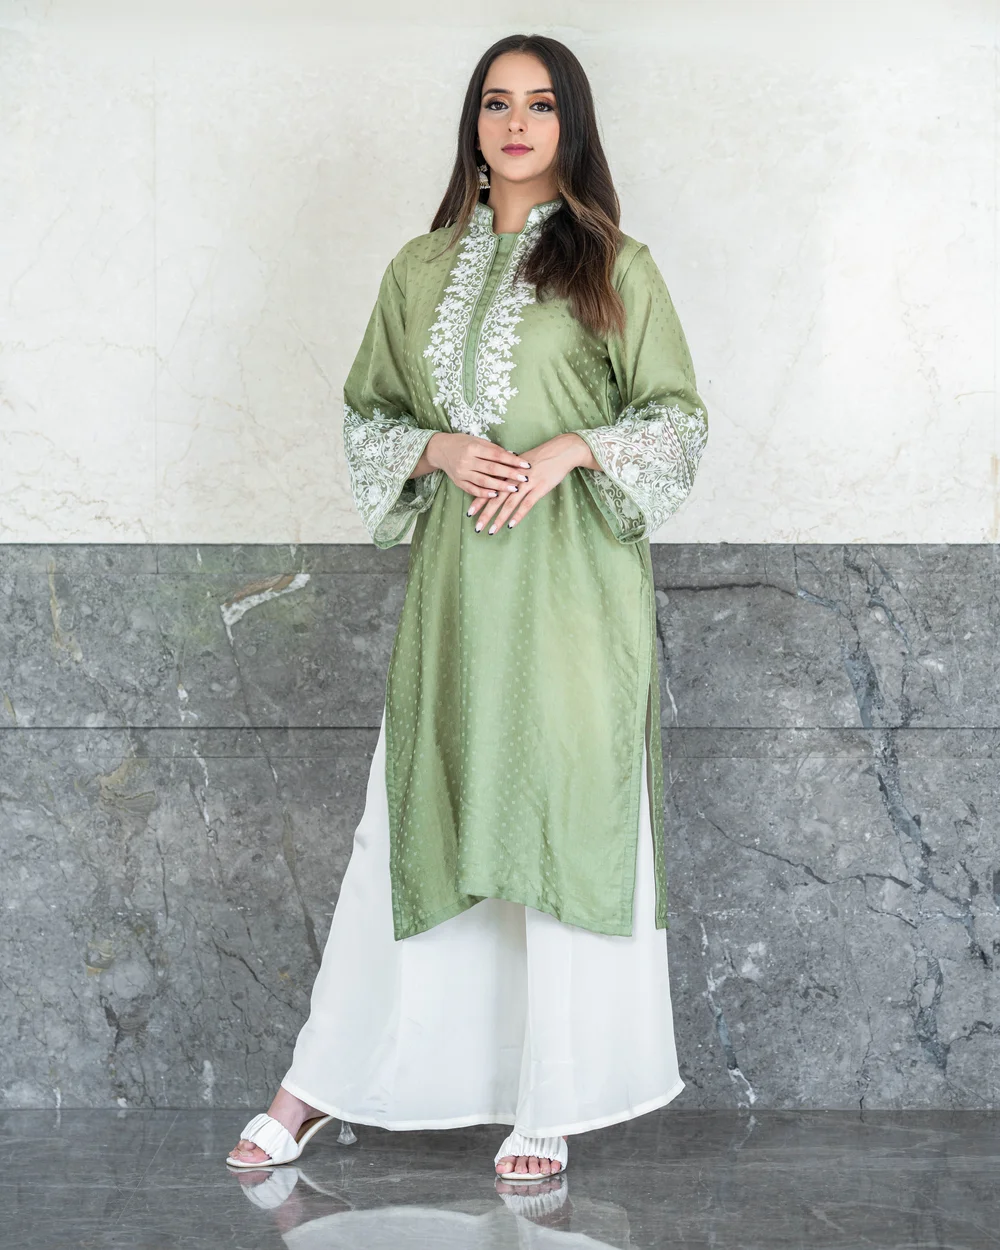 Mangalam Designer Pvt. Ltd. - Shop for latest ladies kurti designs, long  kurtis, designer long kurtis. New kurti designs are added daily. Start  Shopping - https://www.mangalamdesigner.in/Products/Women/Kurti Whats app  Chat & Video Call